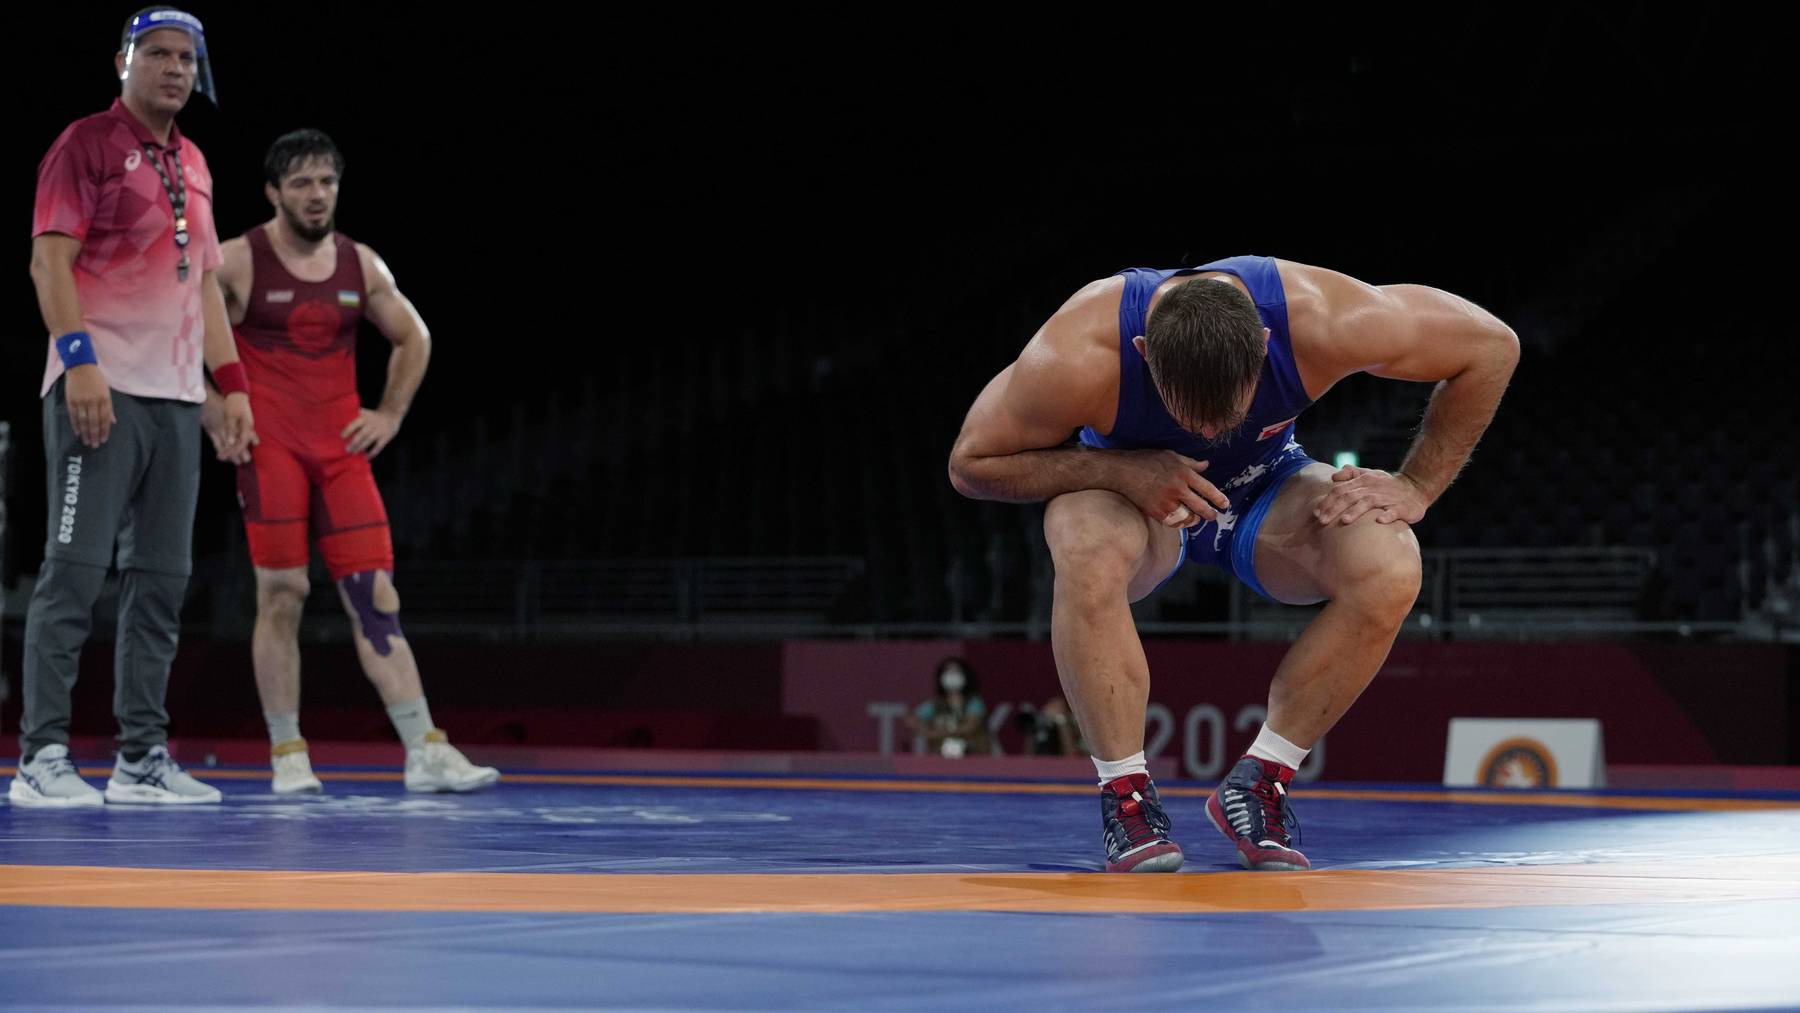 Switzerland's Stefan Reichmuth kneels after he lost against Uzbekistan's Shapiev Jayrail during the men's 86kg Freestyle wrestling repechage match at the 2020 Summer Olympics, Thursday, Aug. 5, 2021, in Tokyo, Japan.